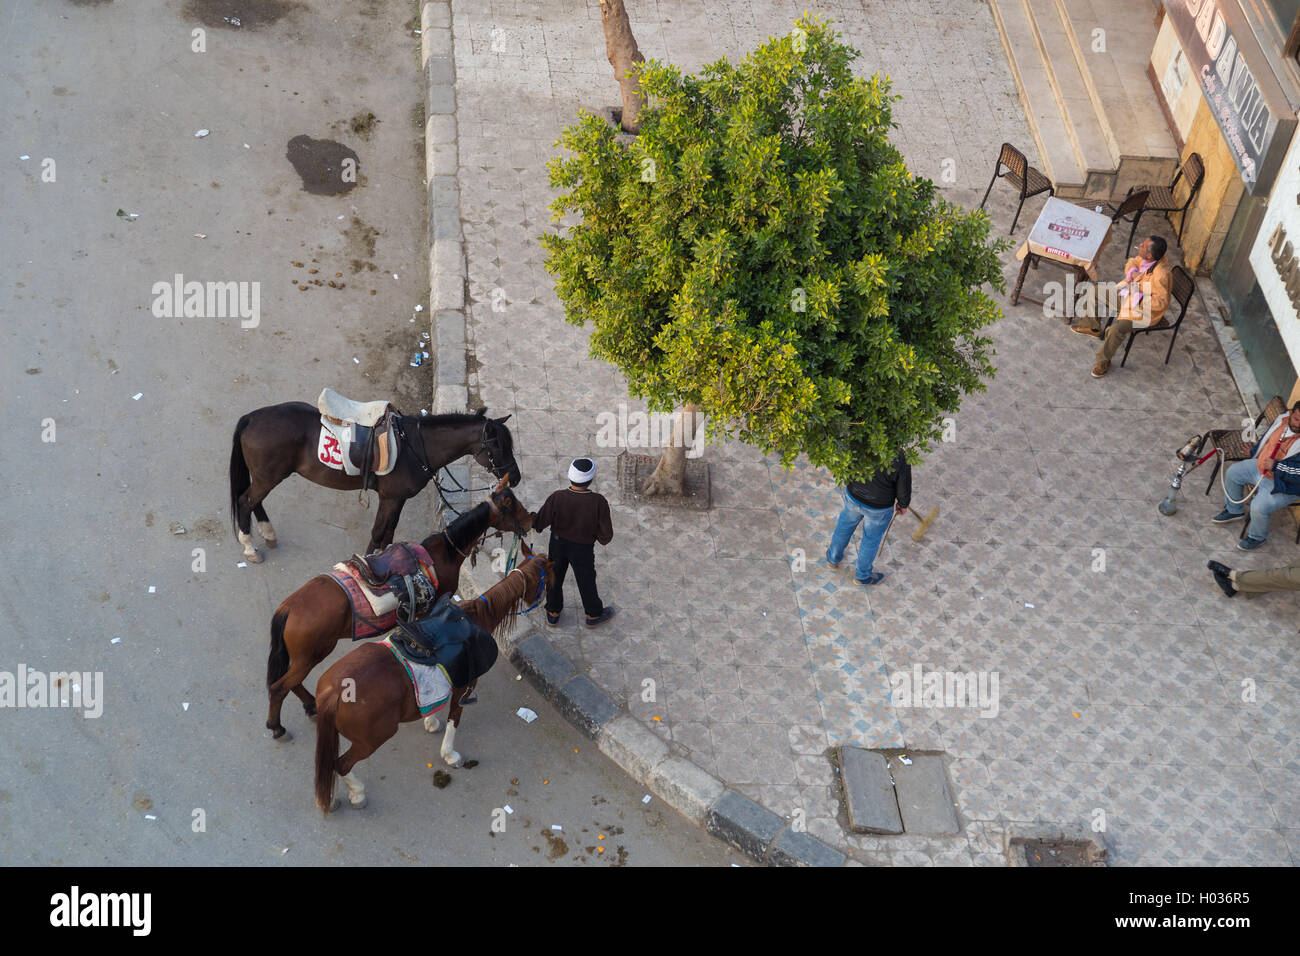 CAIRO, EGYPT - FEBRUARY 2, 2016: Aerial view of street corner with local man renting horses for riding. Stock Photo